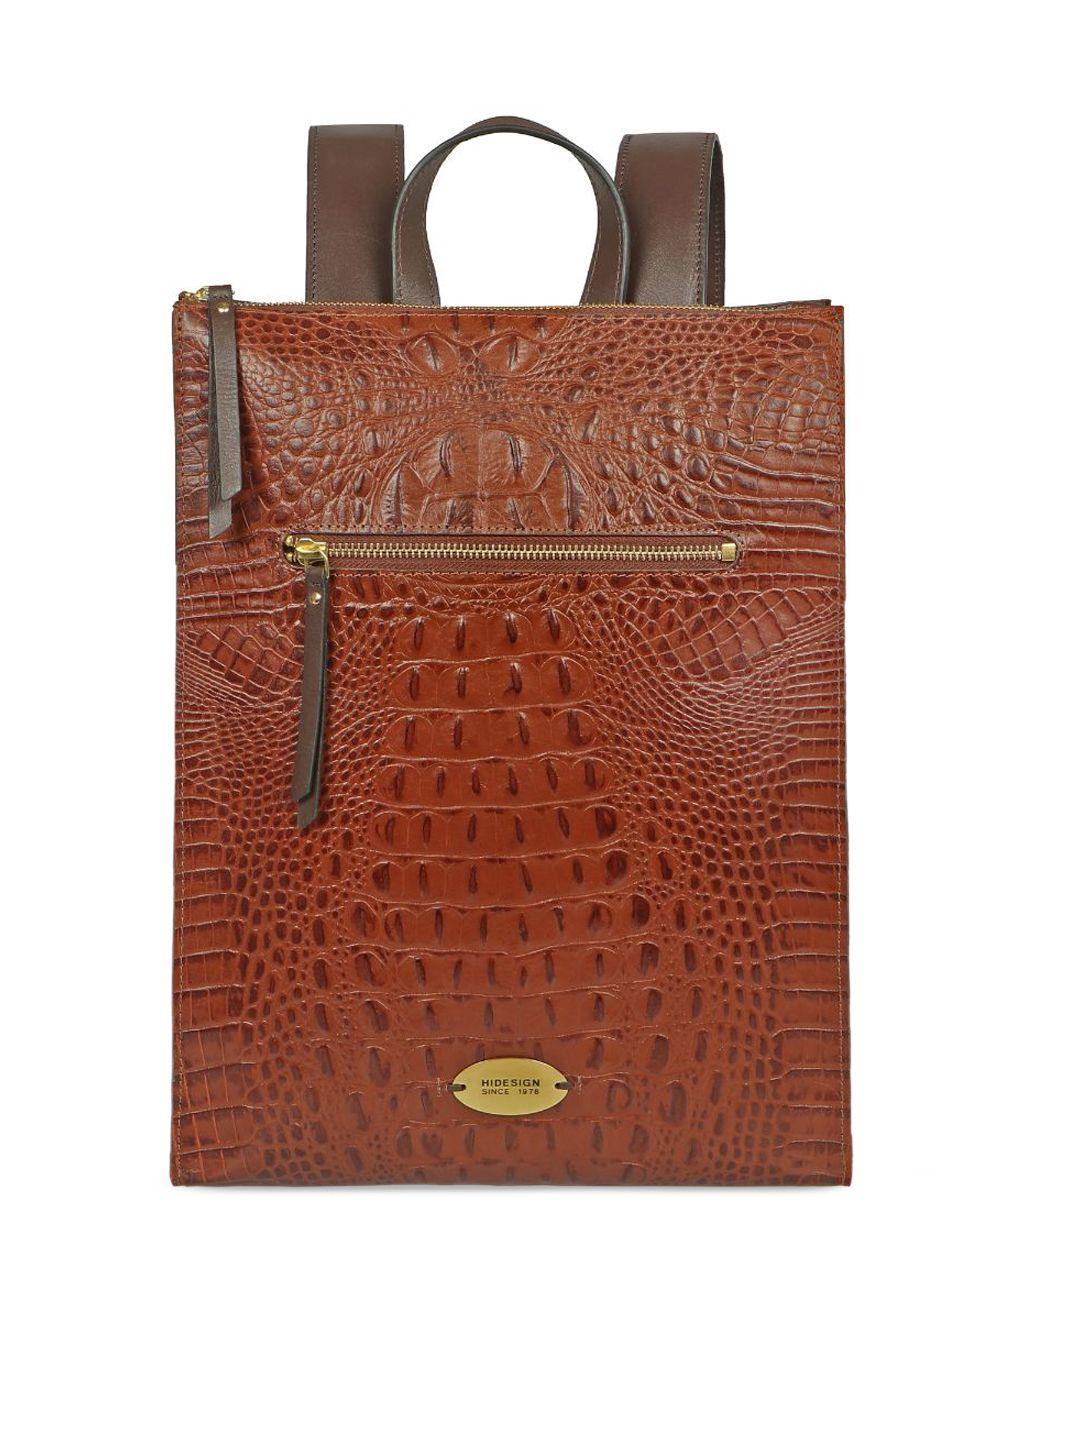 hidesign-animal-textured-leather-structured-back-bag